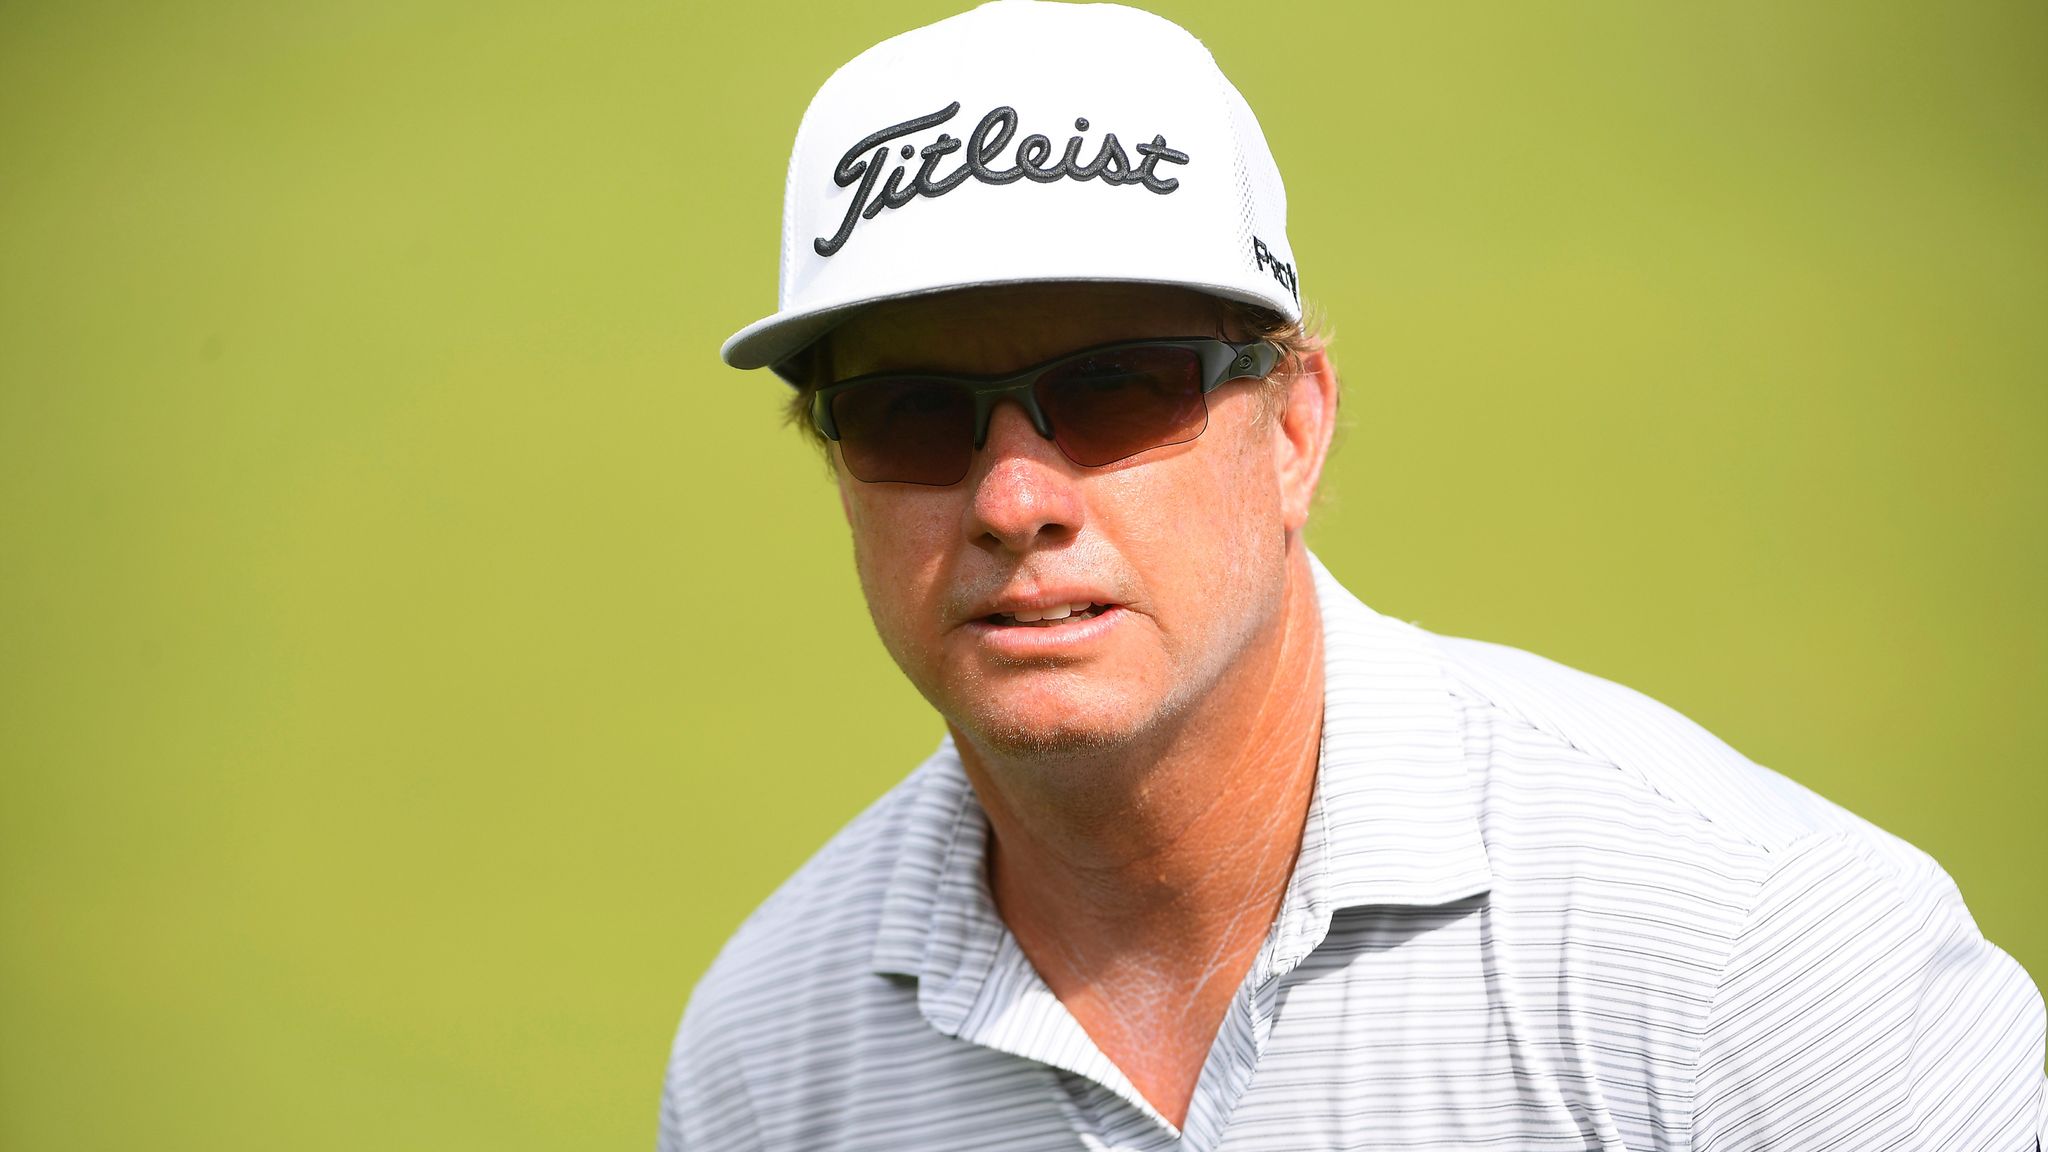 19 Astounding Facts About Charley Hoffman - Facts.net